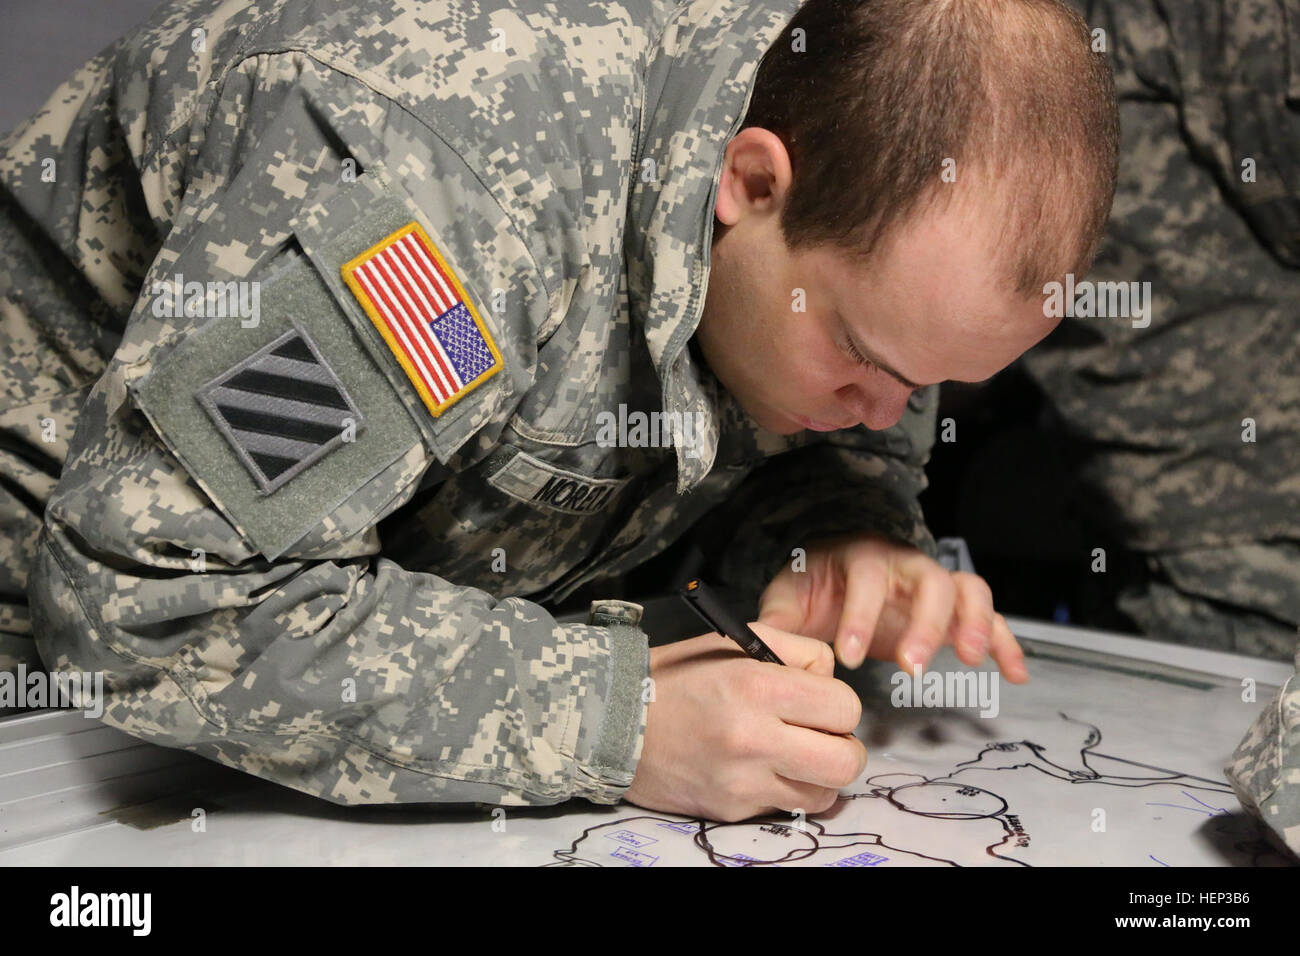 U.S. Army Sgt. Jesus Moreta of 2nd Cavalry Regiment draws a map in preparation for a course of action brief during exercise Allied Spirit at the Joint Multinational Readiness Center in Hohenfels, Germany, Jan. 23, 2015. Exercise Allied Spirit includes more than 2,000 participants from Canada, Hungary, Netherlands, United Kingdom, and the U.S. Allied Spirit is exercising tactical interoperability and testing secure communications within Alliance members. (U.S. Army photo by Sgt. Gemma Iglesias/Released) Allied Spirit I 150123-A-QC664-004 Stock Photo